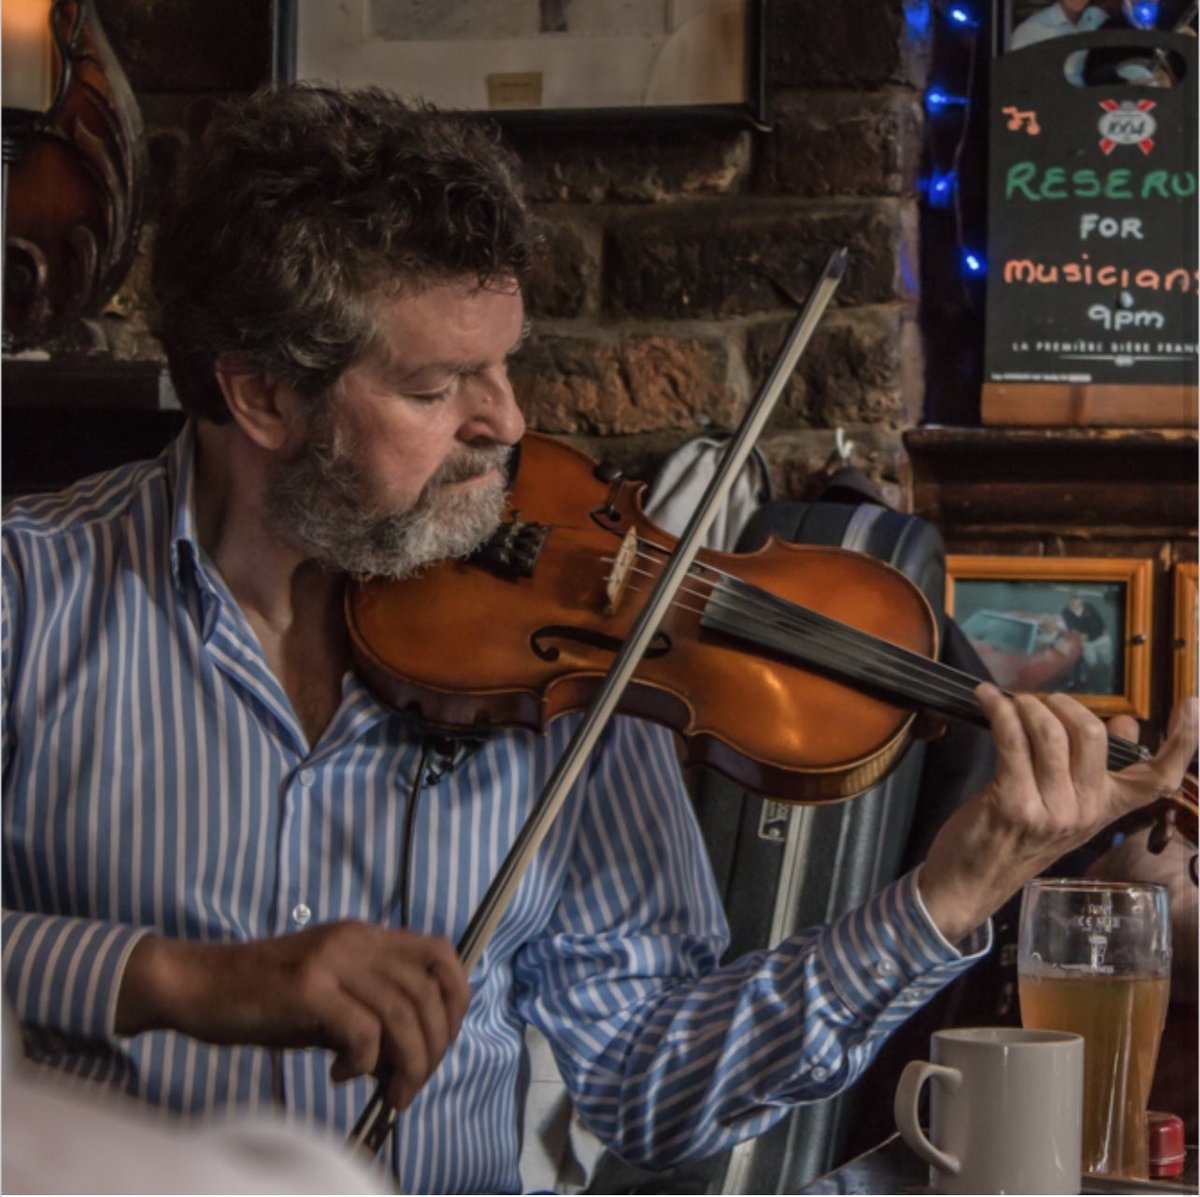 Come have the craic at The Brazen Head with our live music all weekend 🎻

#ireland #irish #irishmusic #tradmusic #dublin #thebrazenhead #thebrazenheaddublin